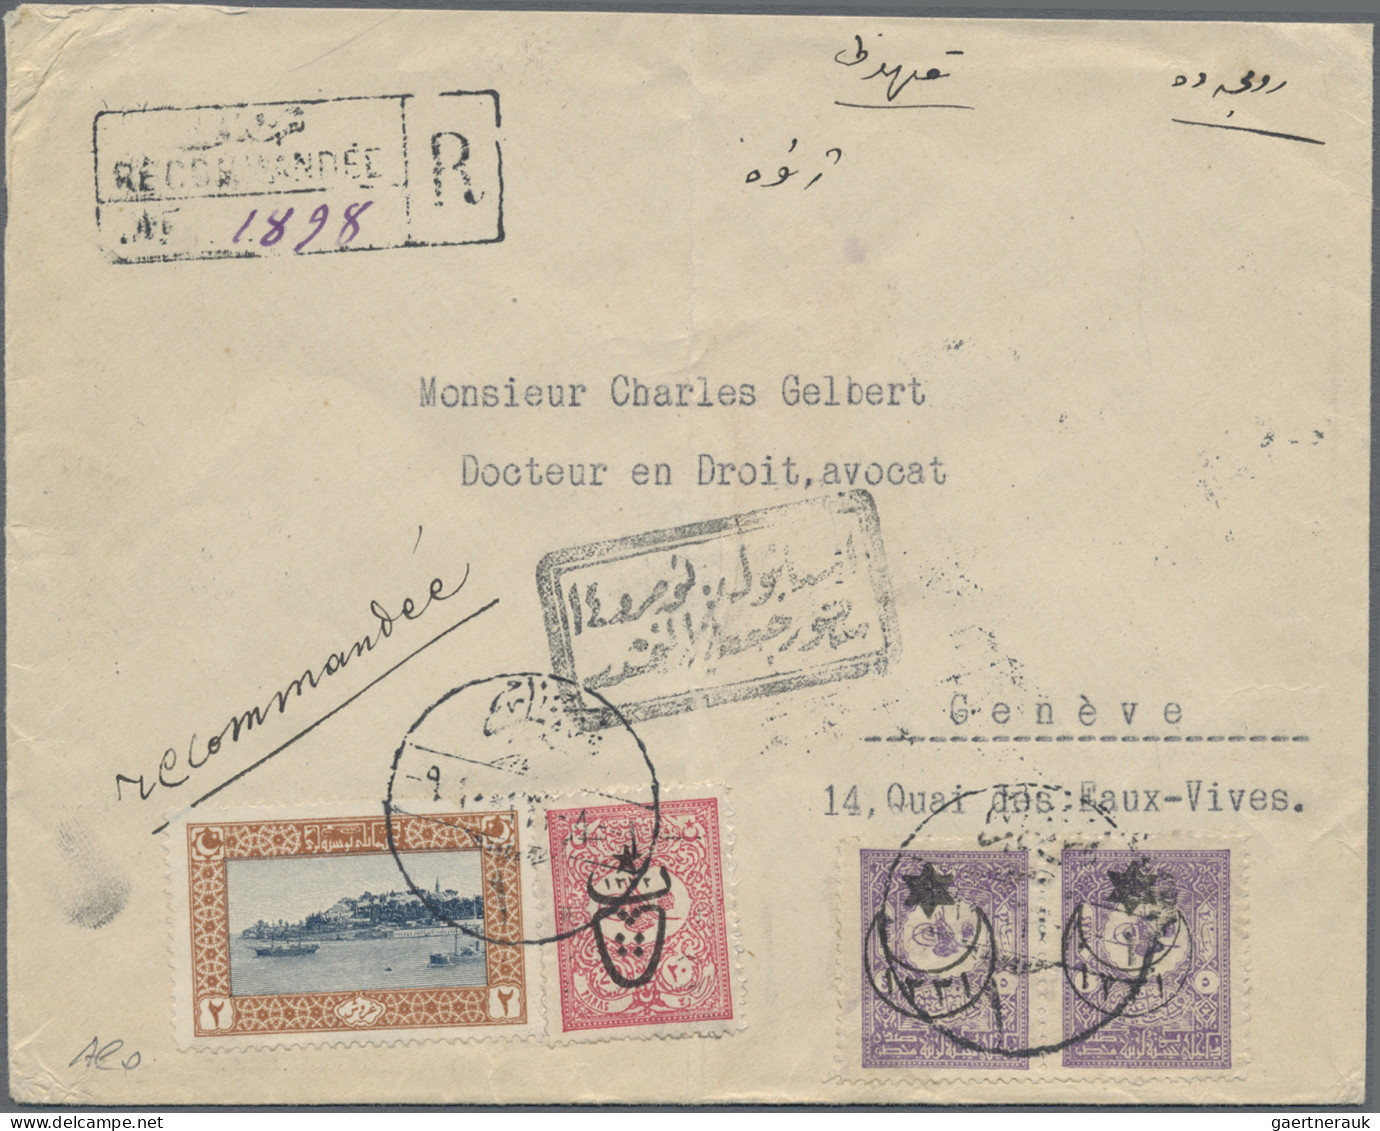 Turkey: 1900/1918 Collection of 64 covers, picture postcards and postal statione